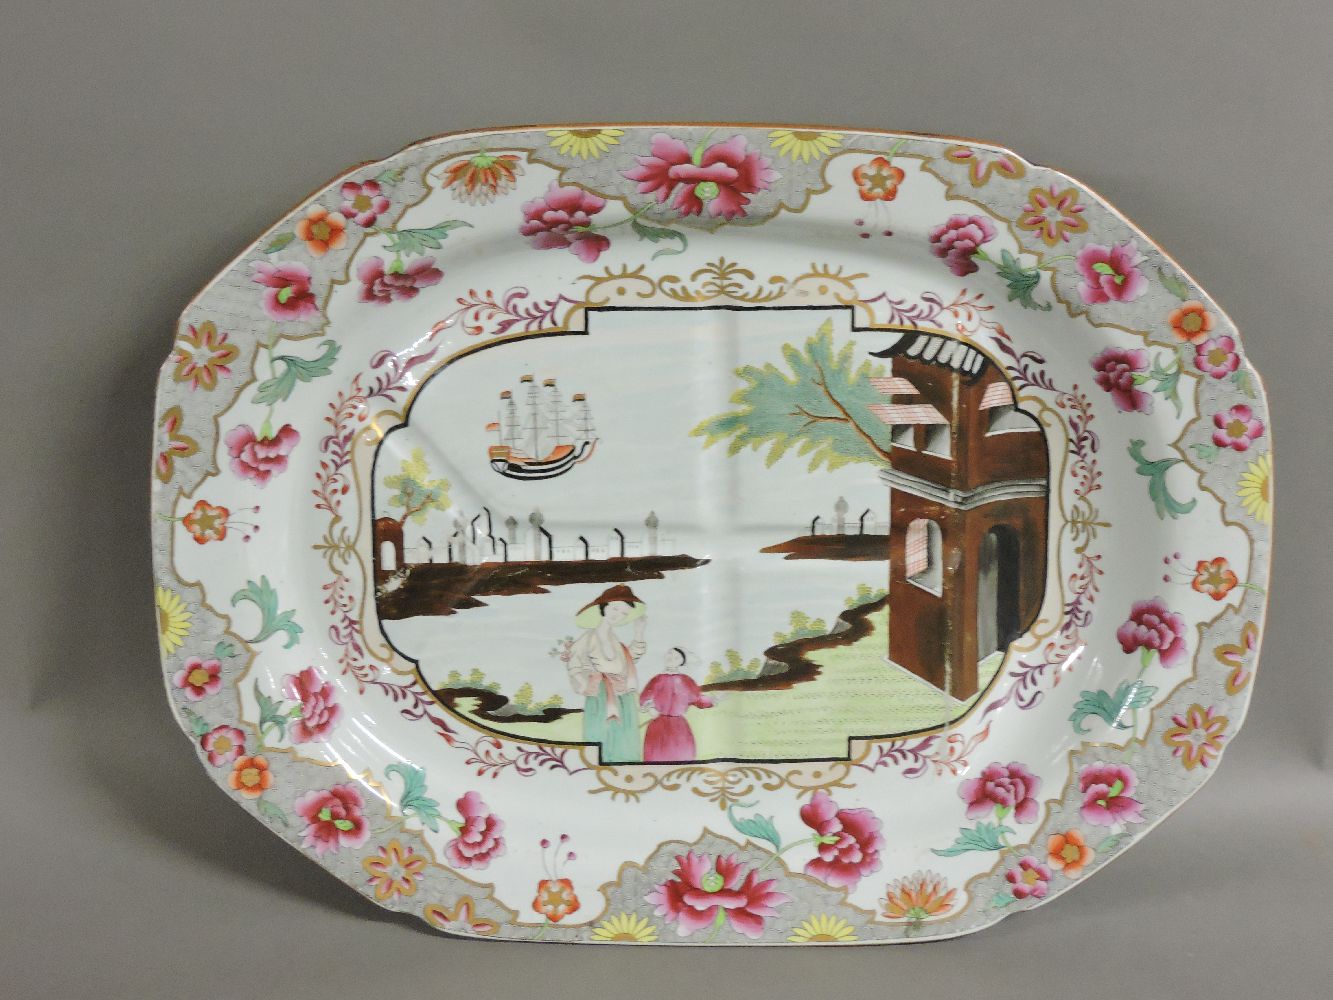 A Spode meat plate,19th century, pattern no 3067, decorated with a 'Chinese' scene of figures,